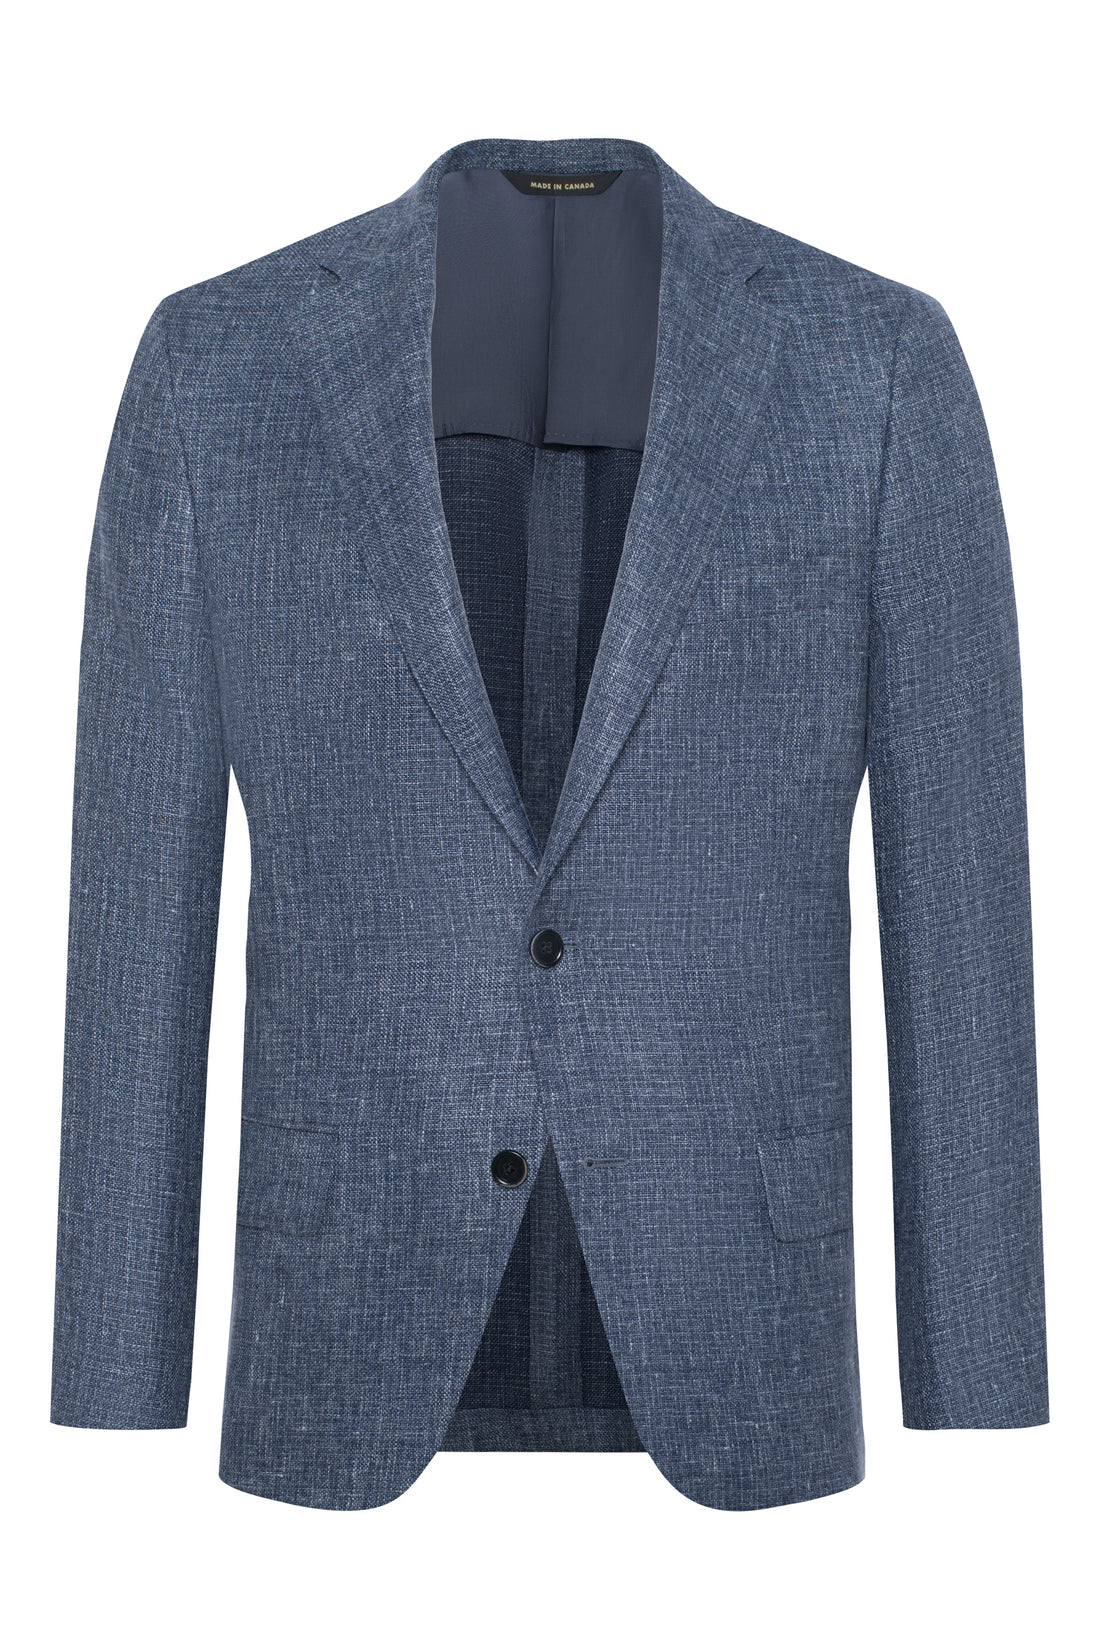 Chambray Blue Summertime Textured Jacket